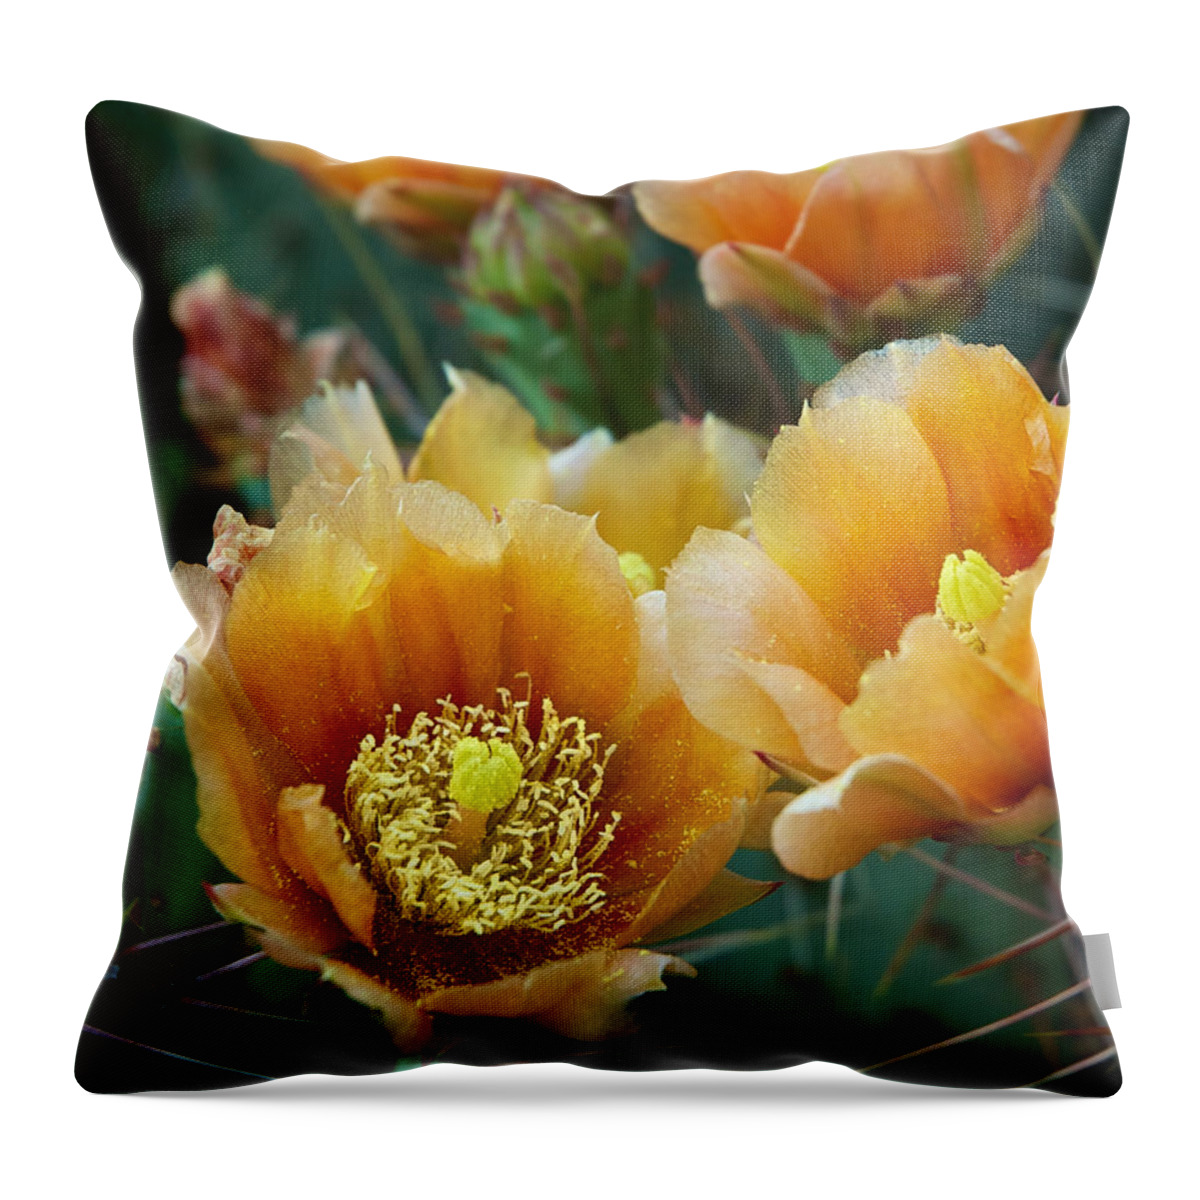 Cacti Throw Pillow featuring the photograph Prickly Pear Cactus by Mary Lee Dereske